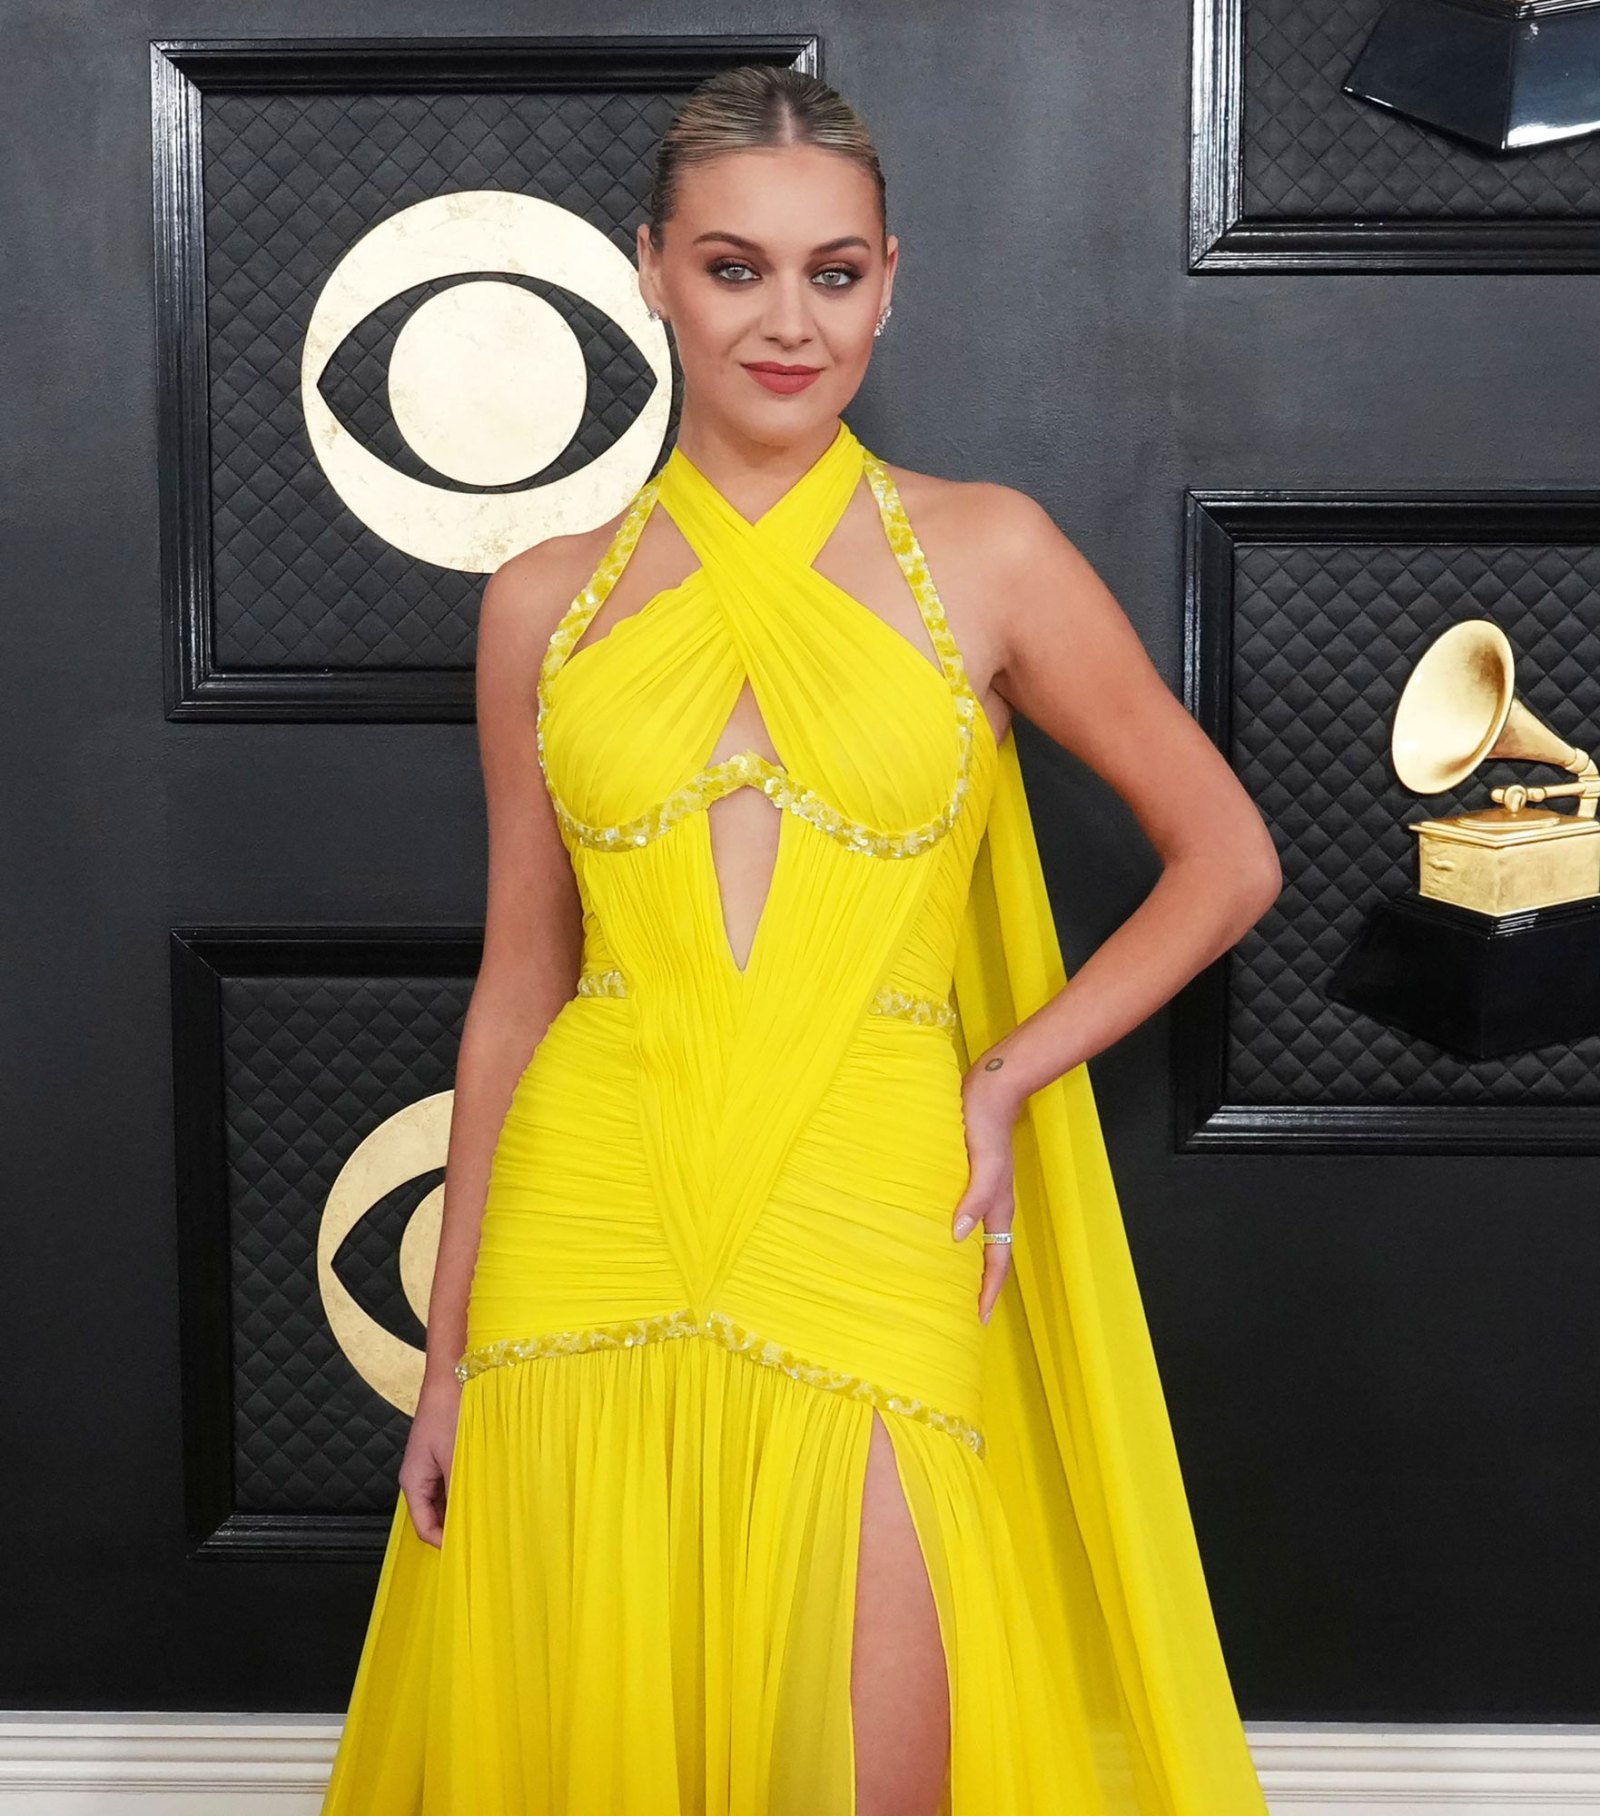 Grammys 2023: Kelsea Ballerini Makes Appearance on the Red Carpet hand on hip